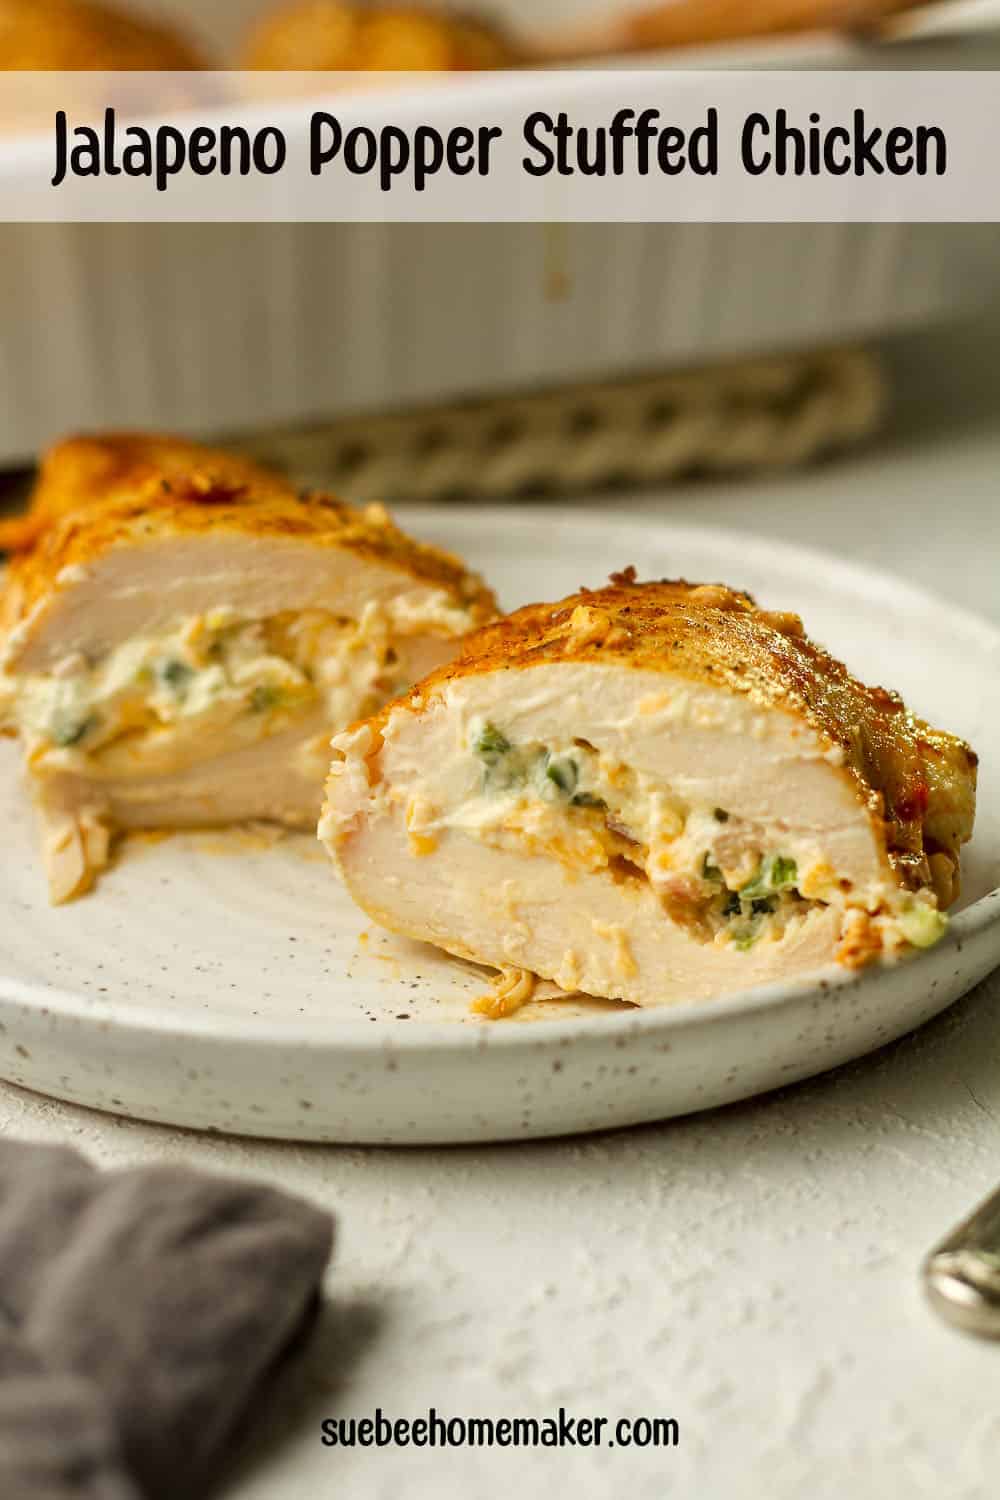 A plate with a halved stuffed chicken breast showing the filling inside.